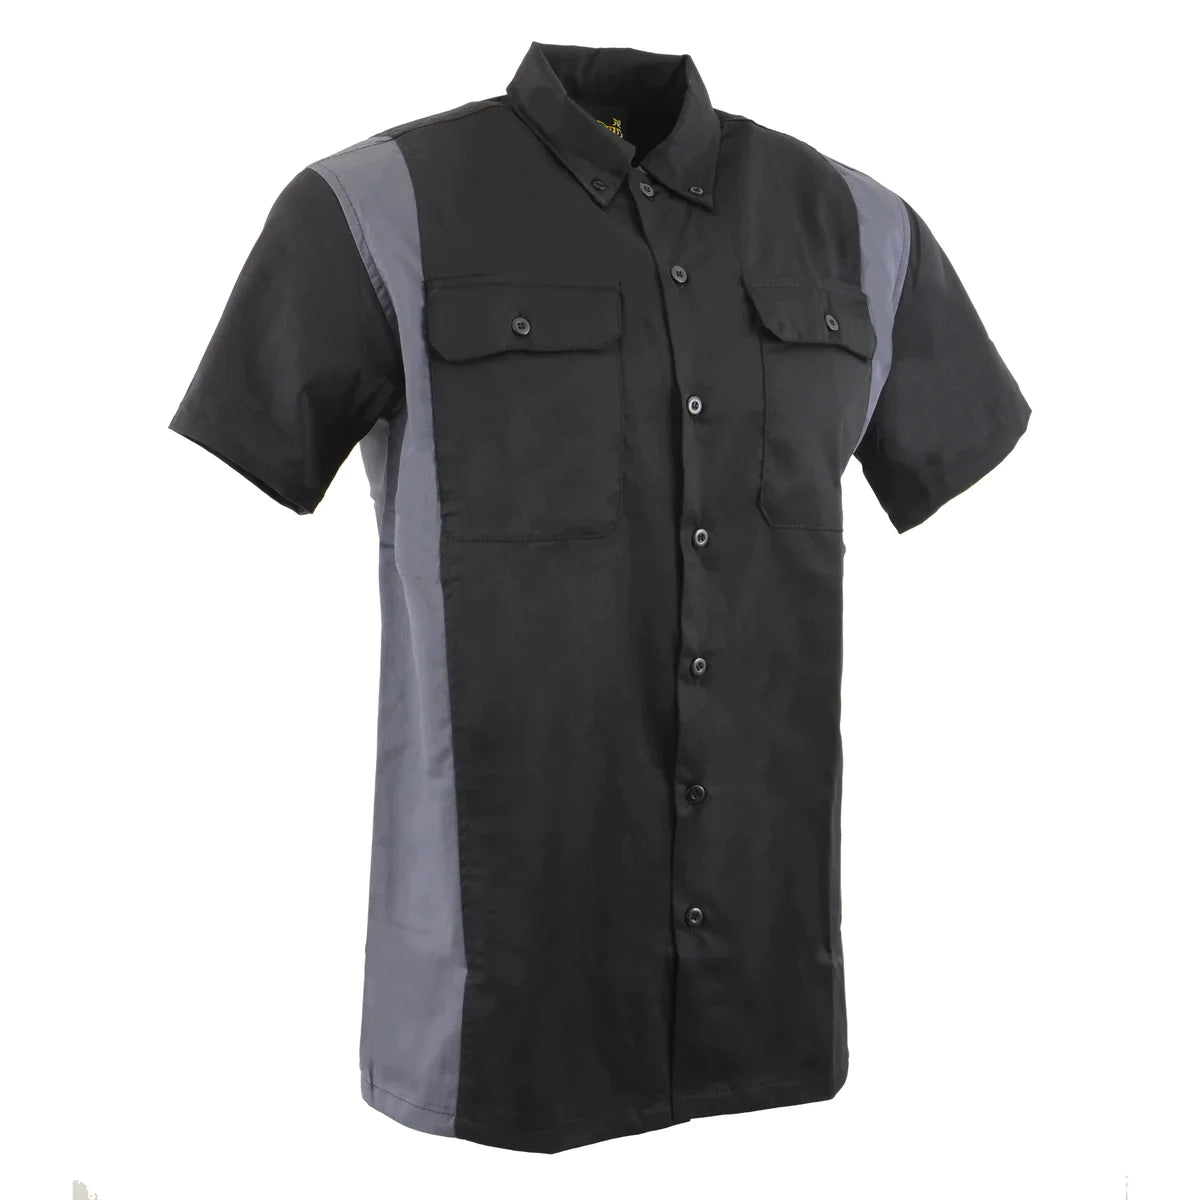 Black and Grey Button Up Heavy-Duty Work Shirt for Men's, Classic Mechanic Work Shirt